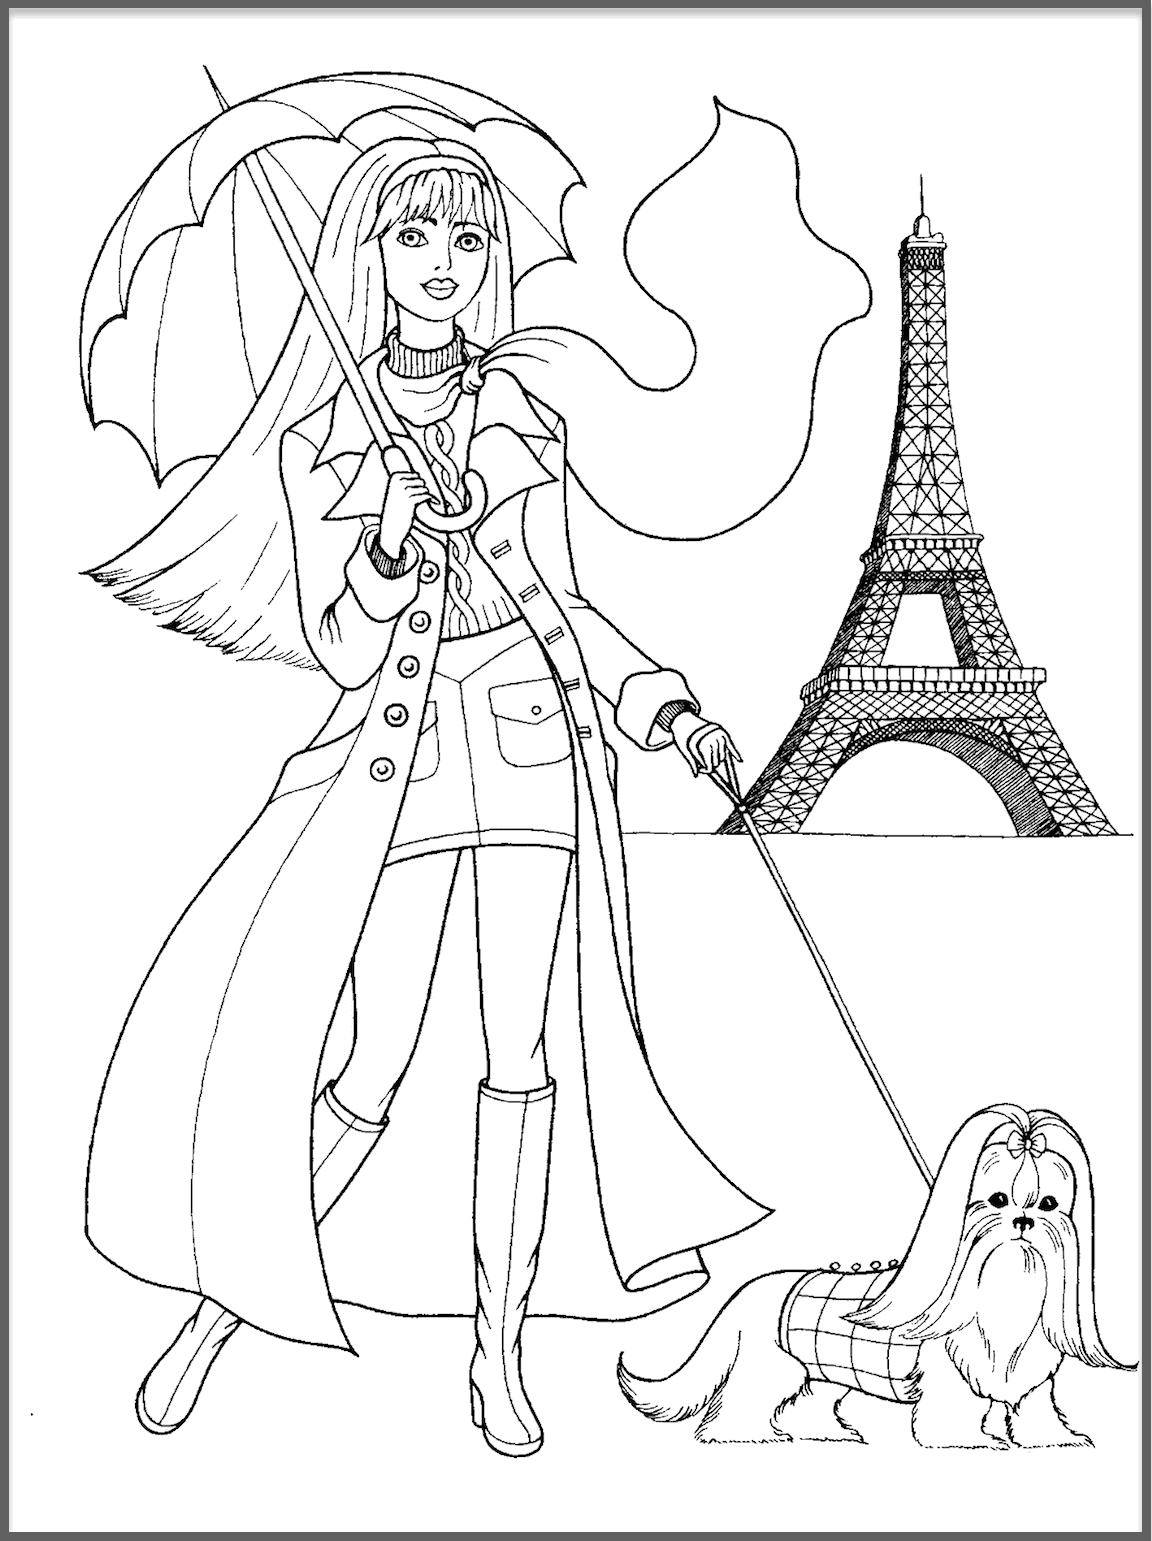 Top 25 Coloring Page Collection: Clothing, Fashion, And You